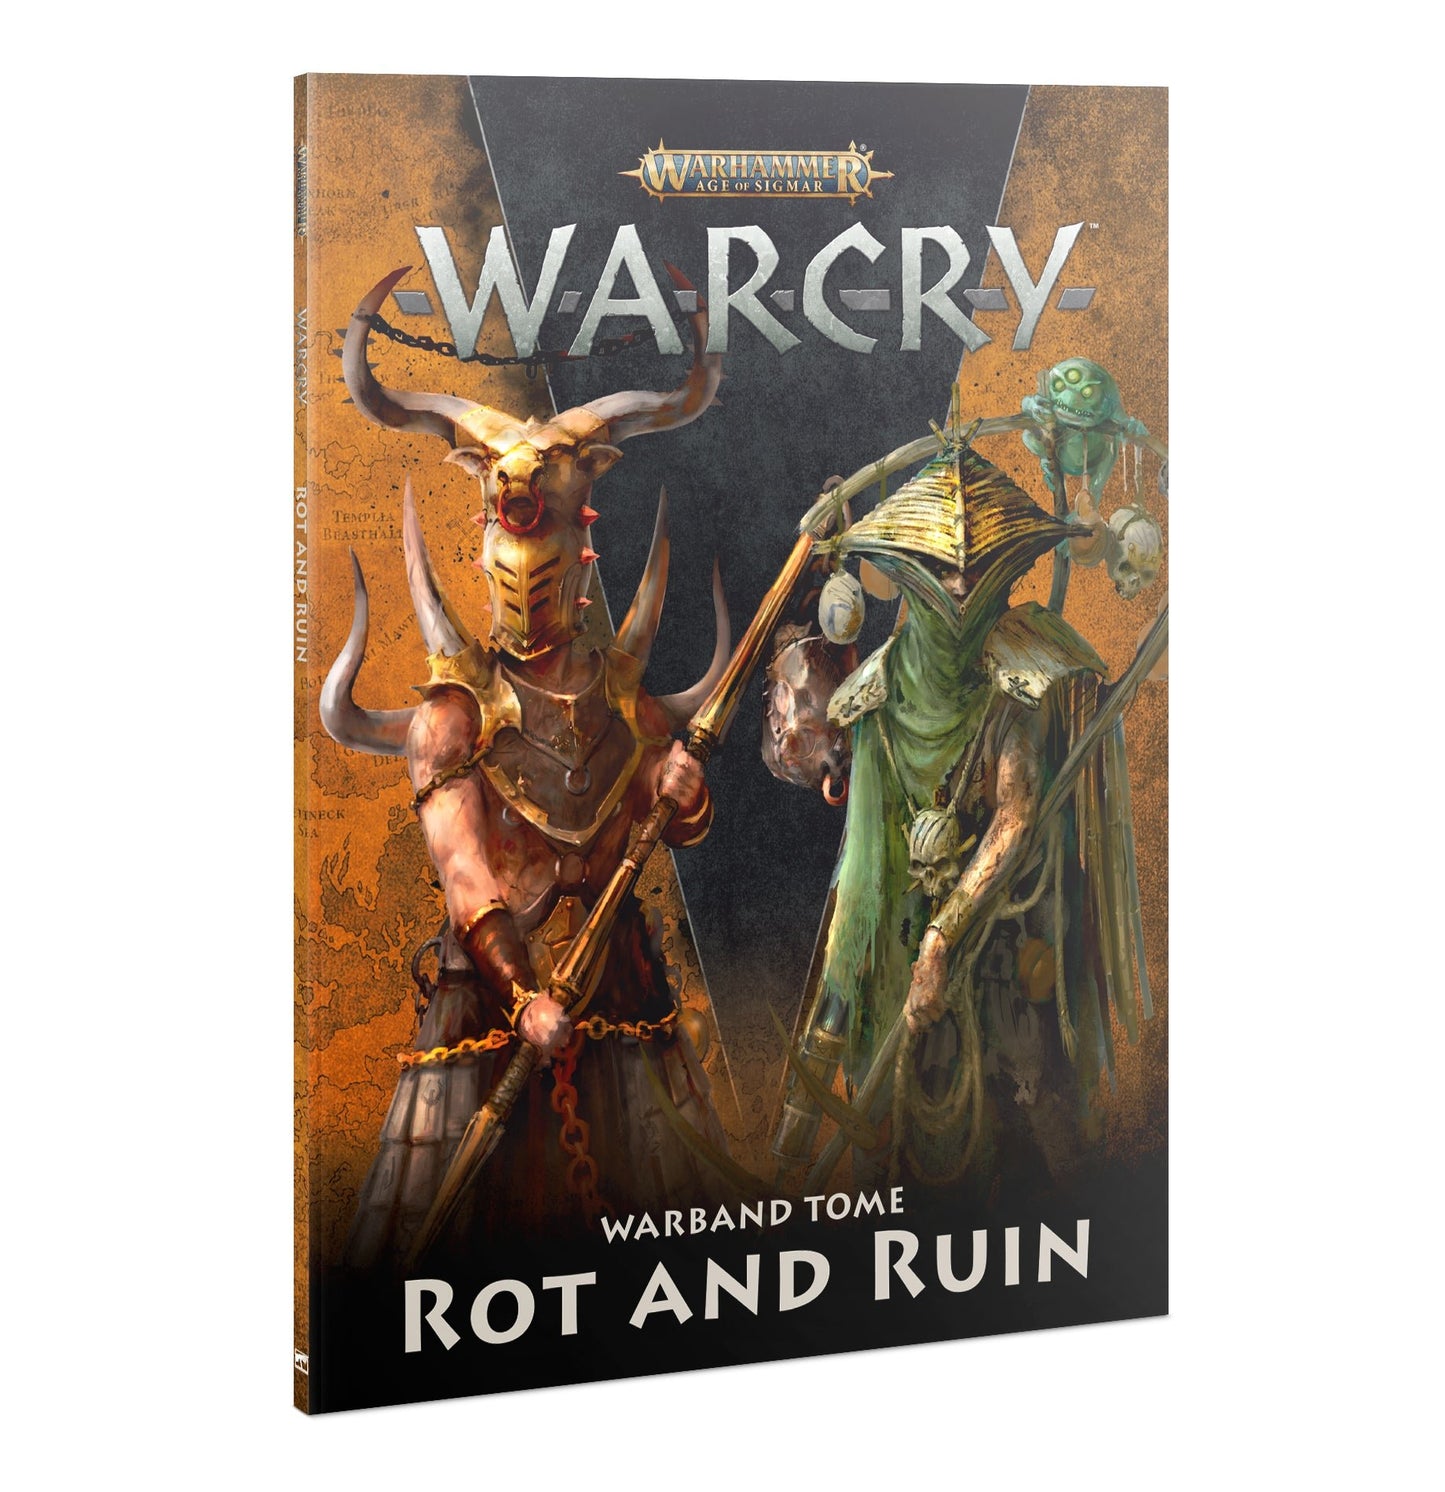 Warcry: Warband Tome - Rot And Ruin - Gamescape